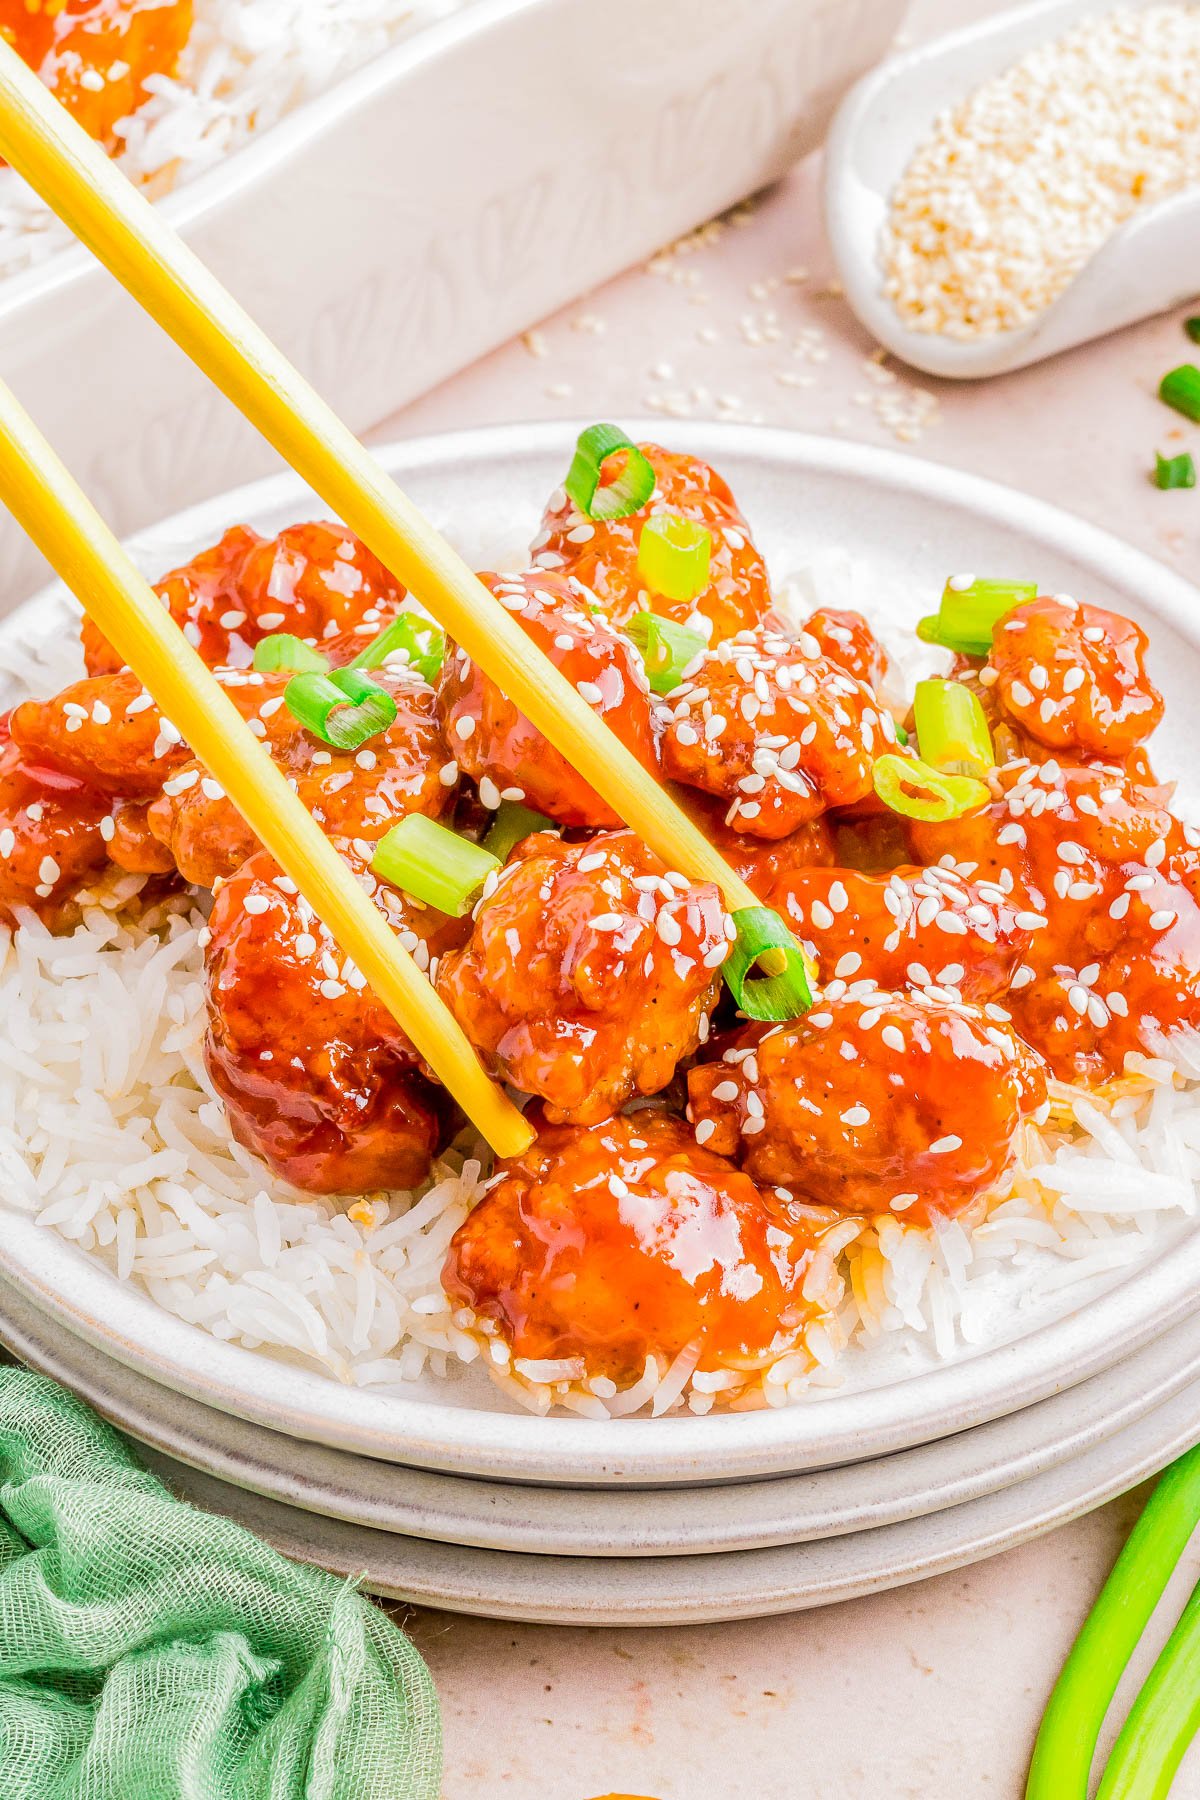 Plate of sesame chicken over rice with chopsticks, garnished with sesame seeds and green onions on a light tabletop.